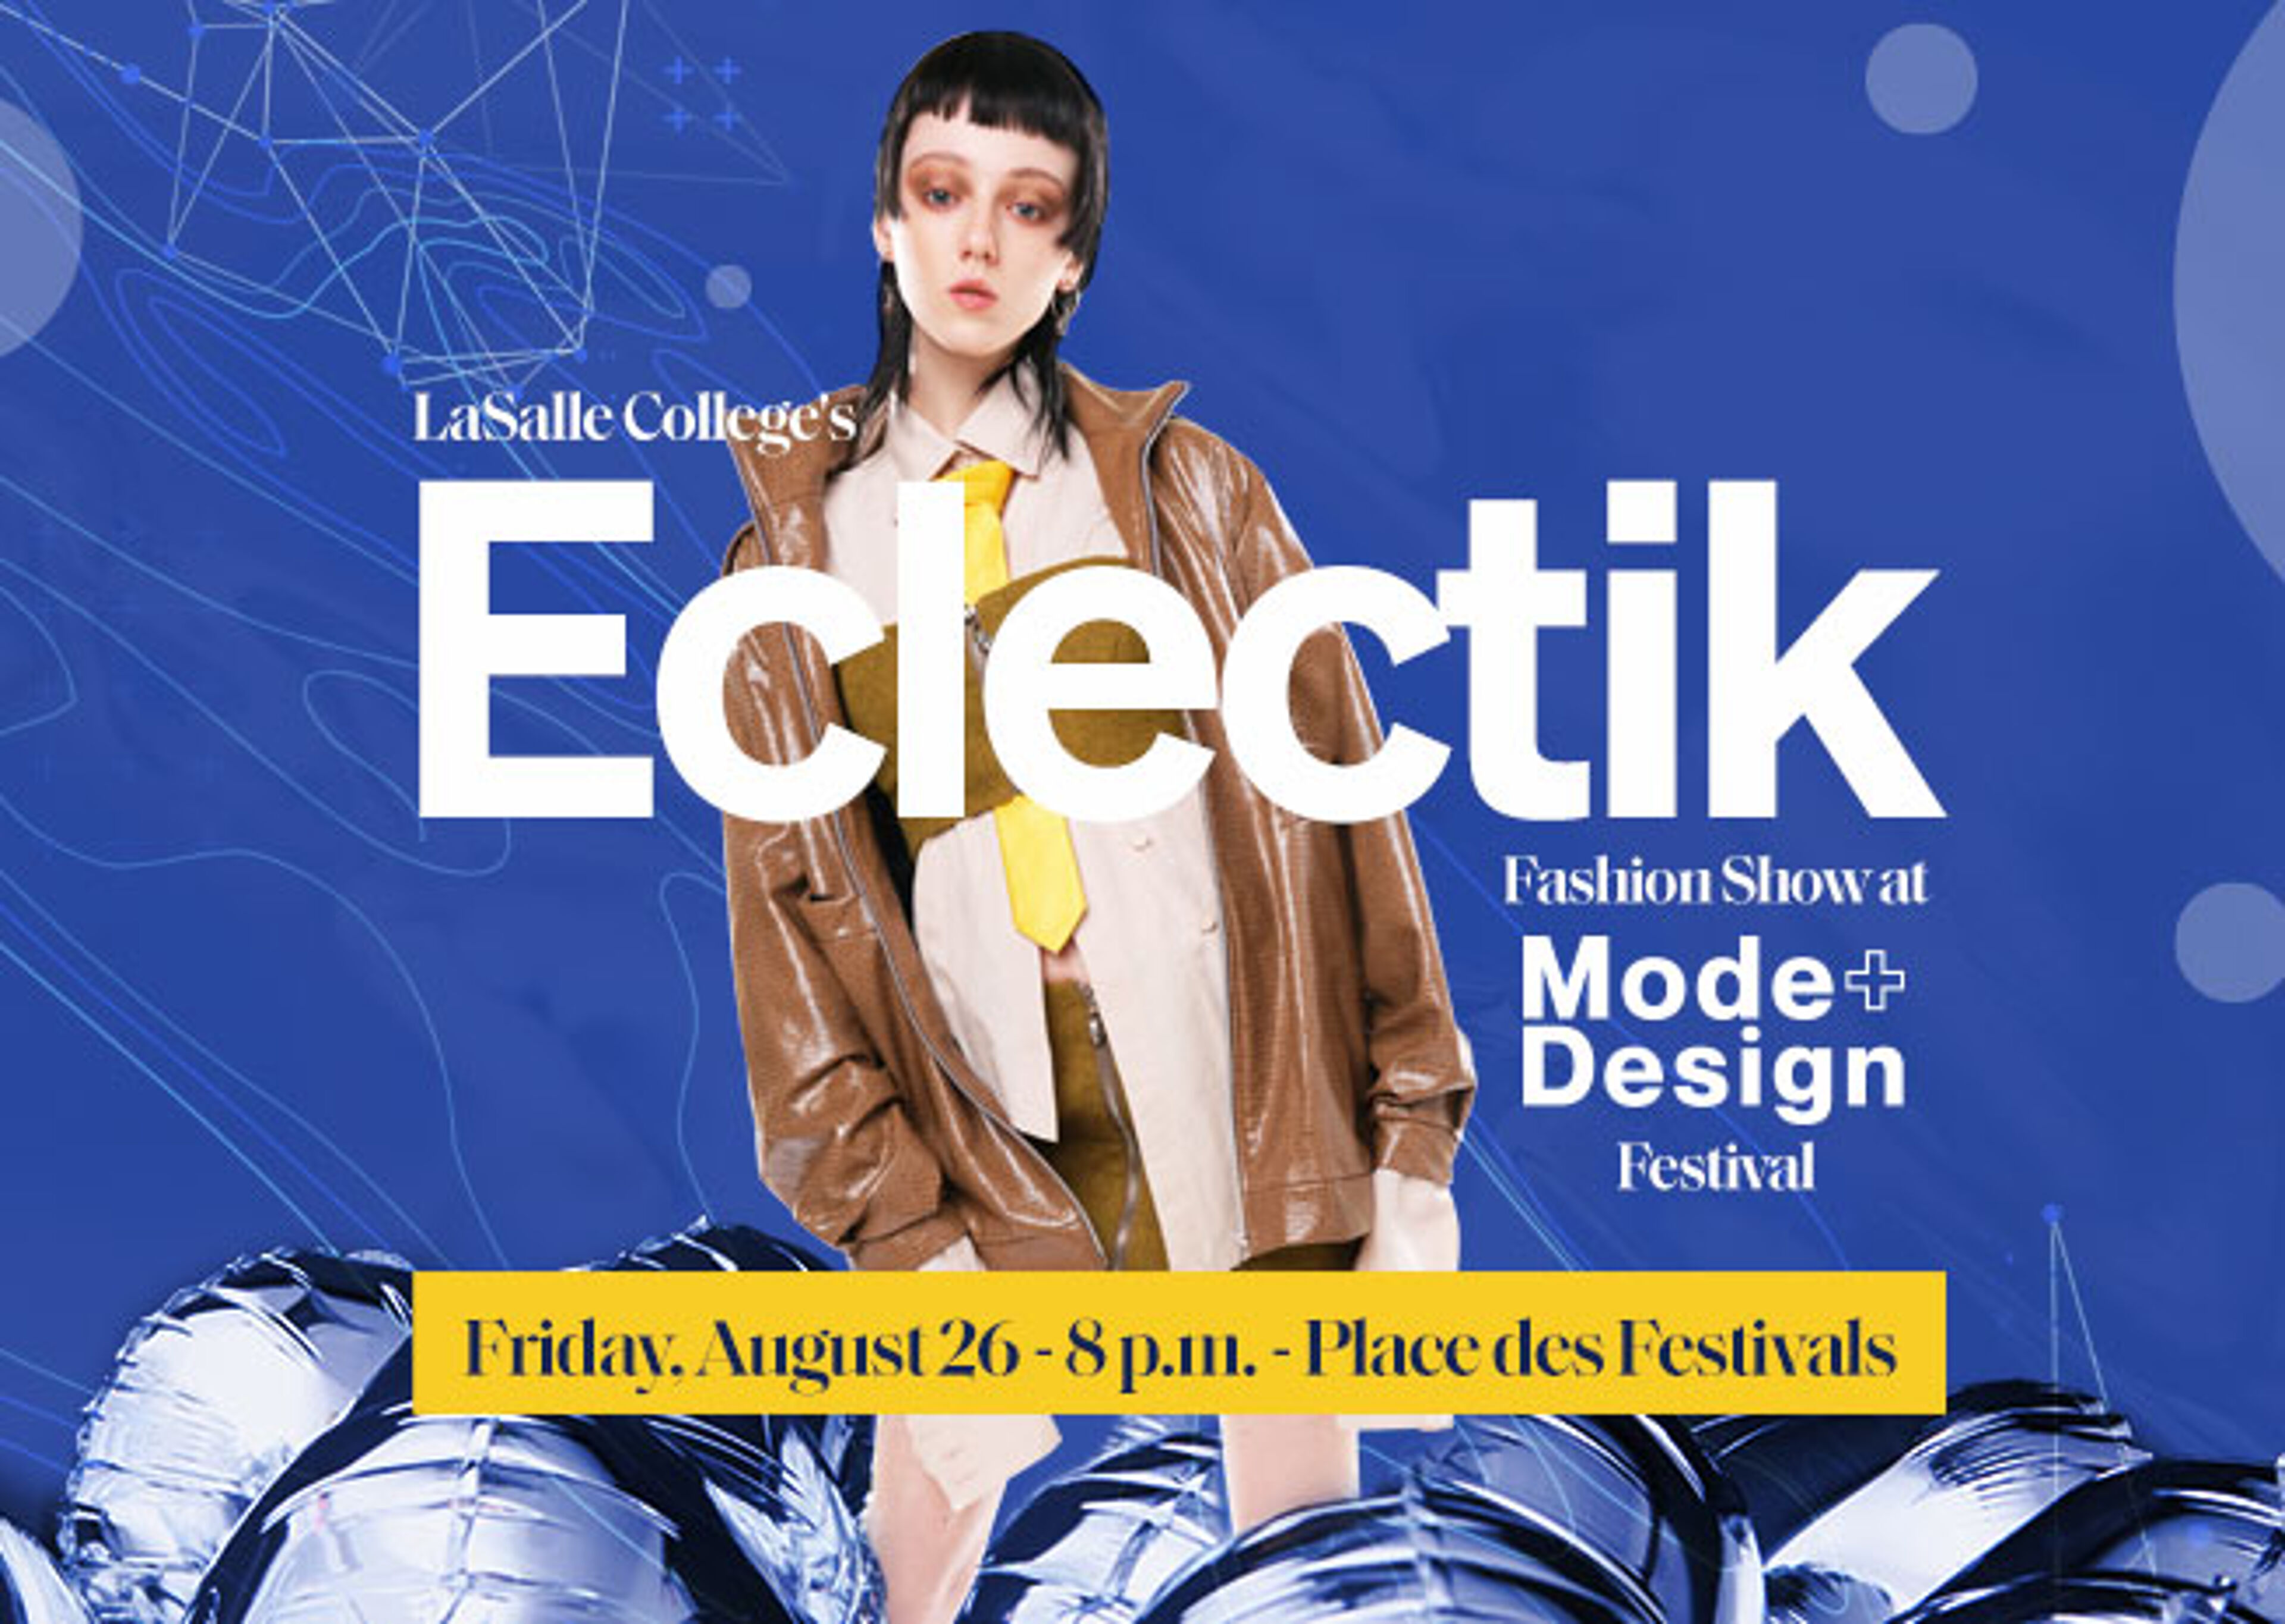 Eclectik' from LaSalle College at the Mode+Design Festival, a runway show on Friday, August 26, at 8 PM - Place des Festivals.